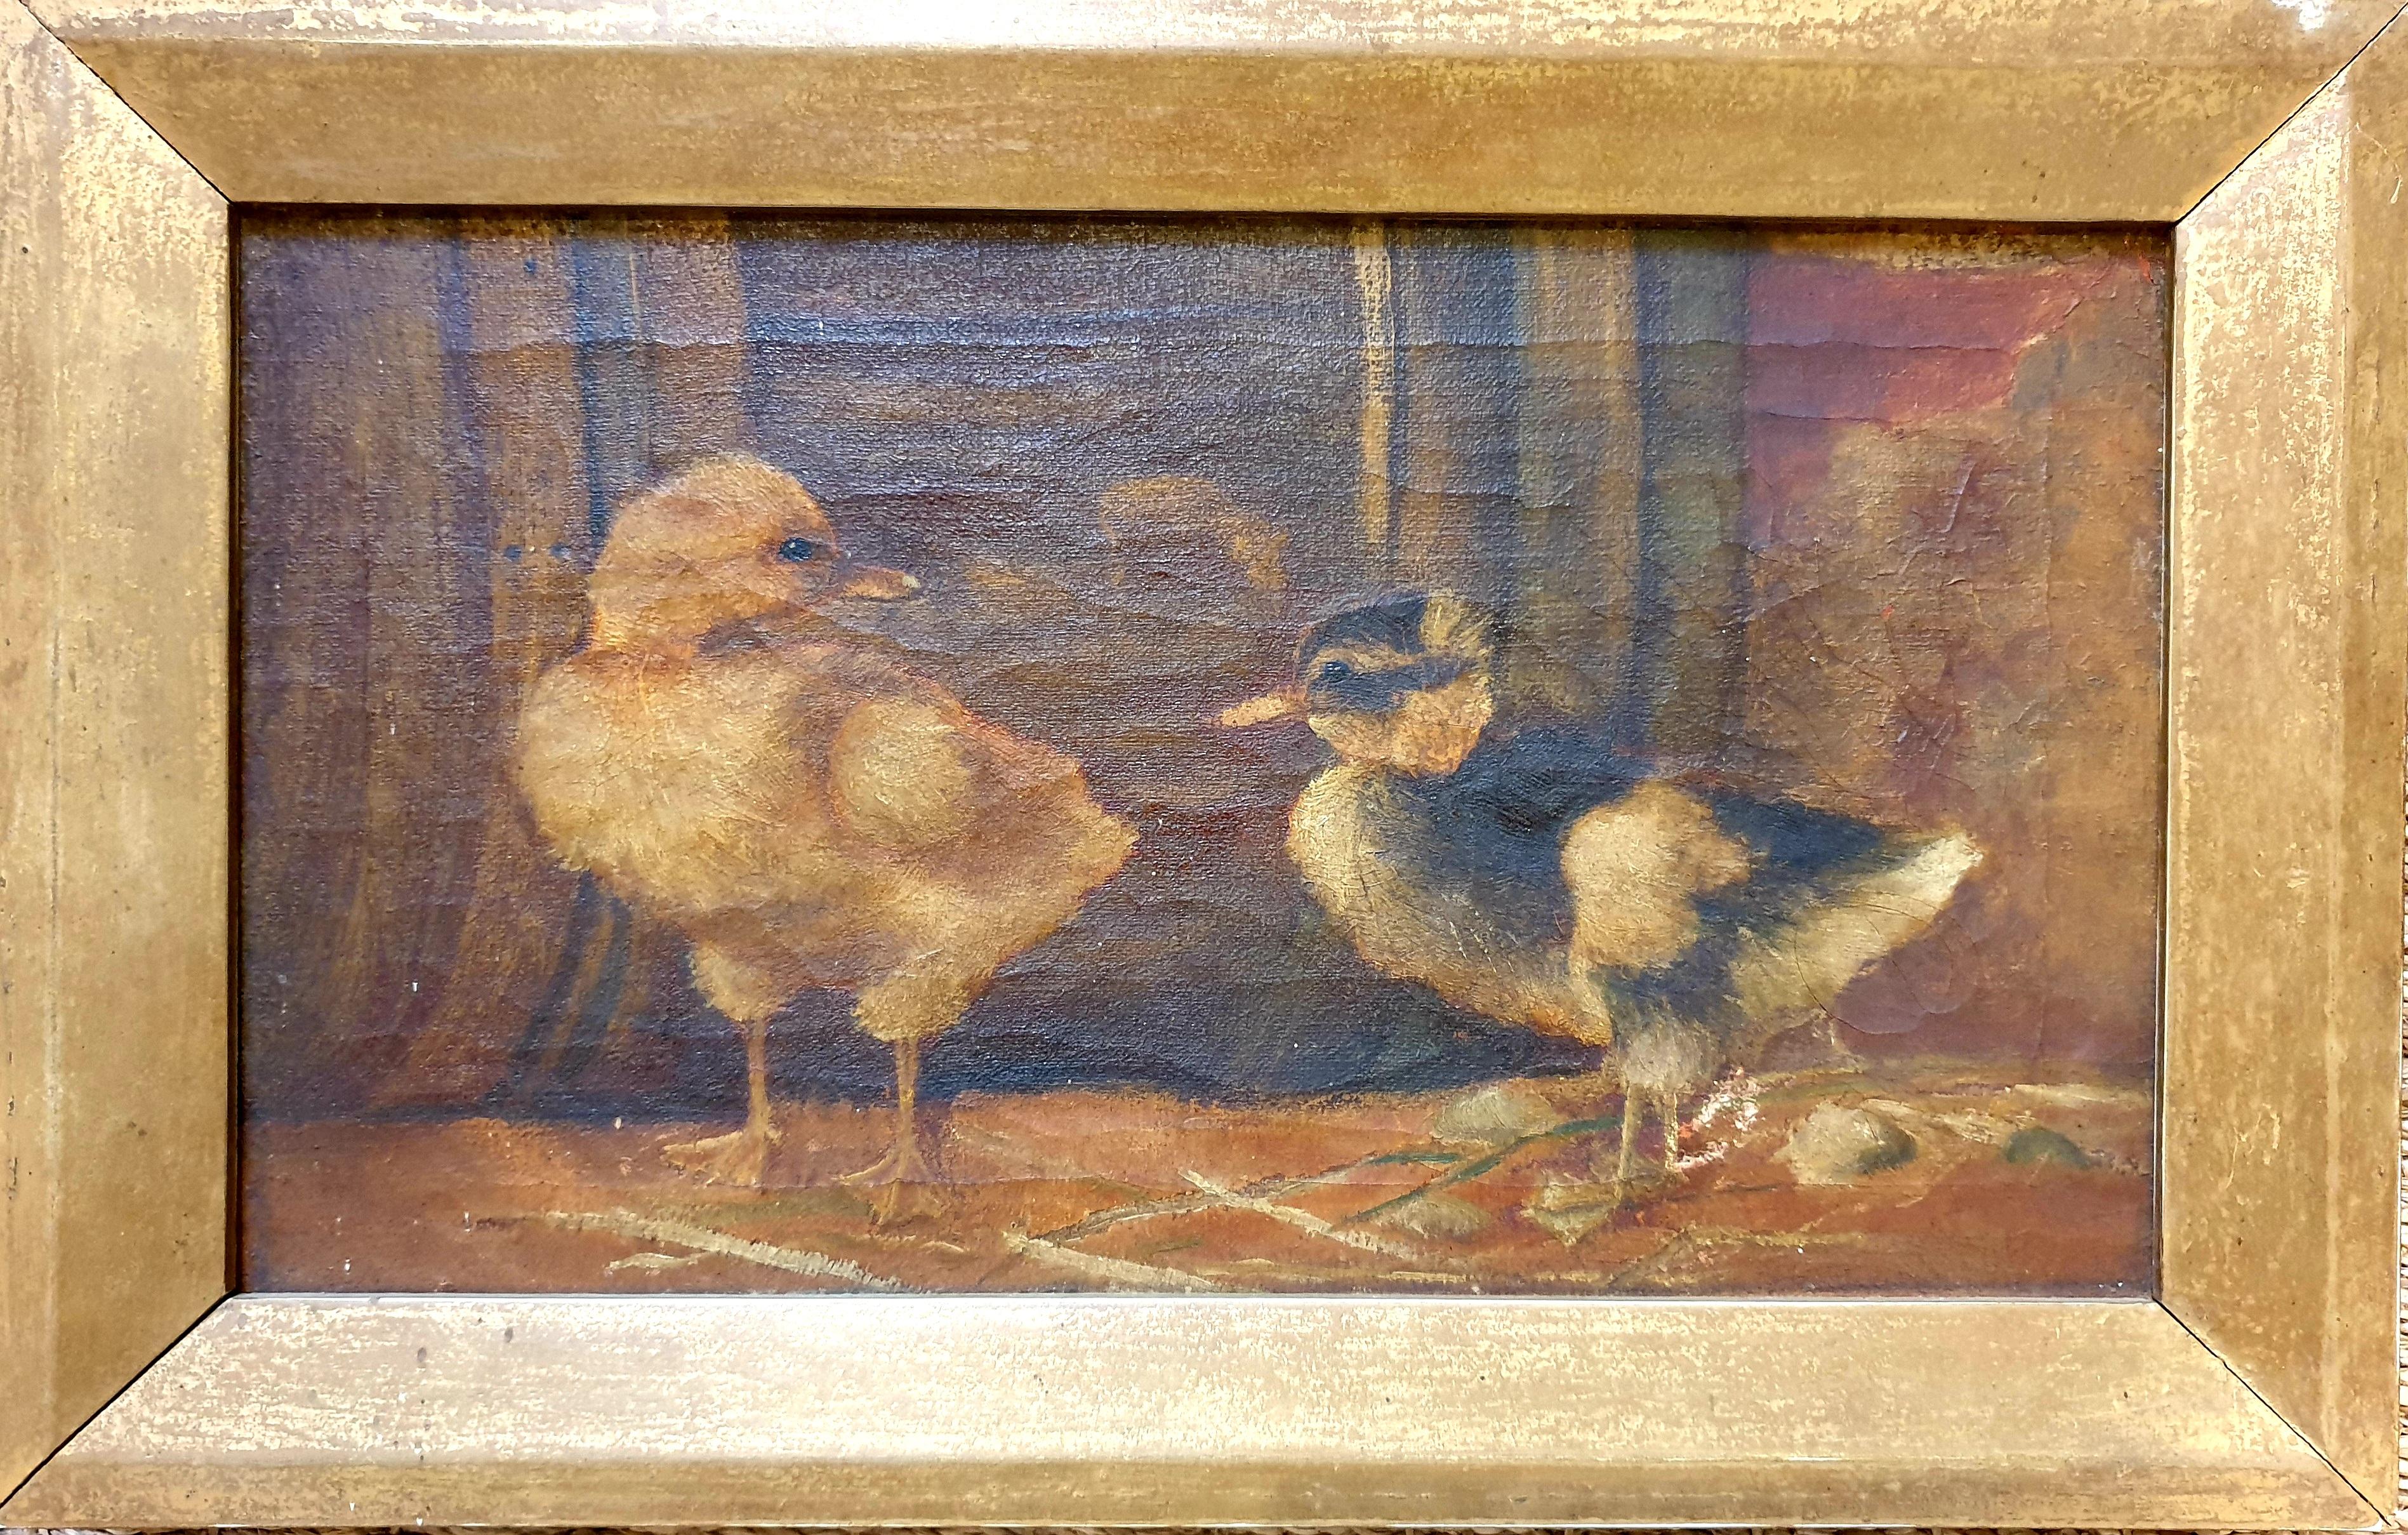 Unknown Animal Painting - The Ducklings. Late 19th Century Oil on Canvas.